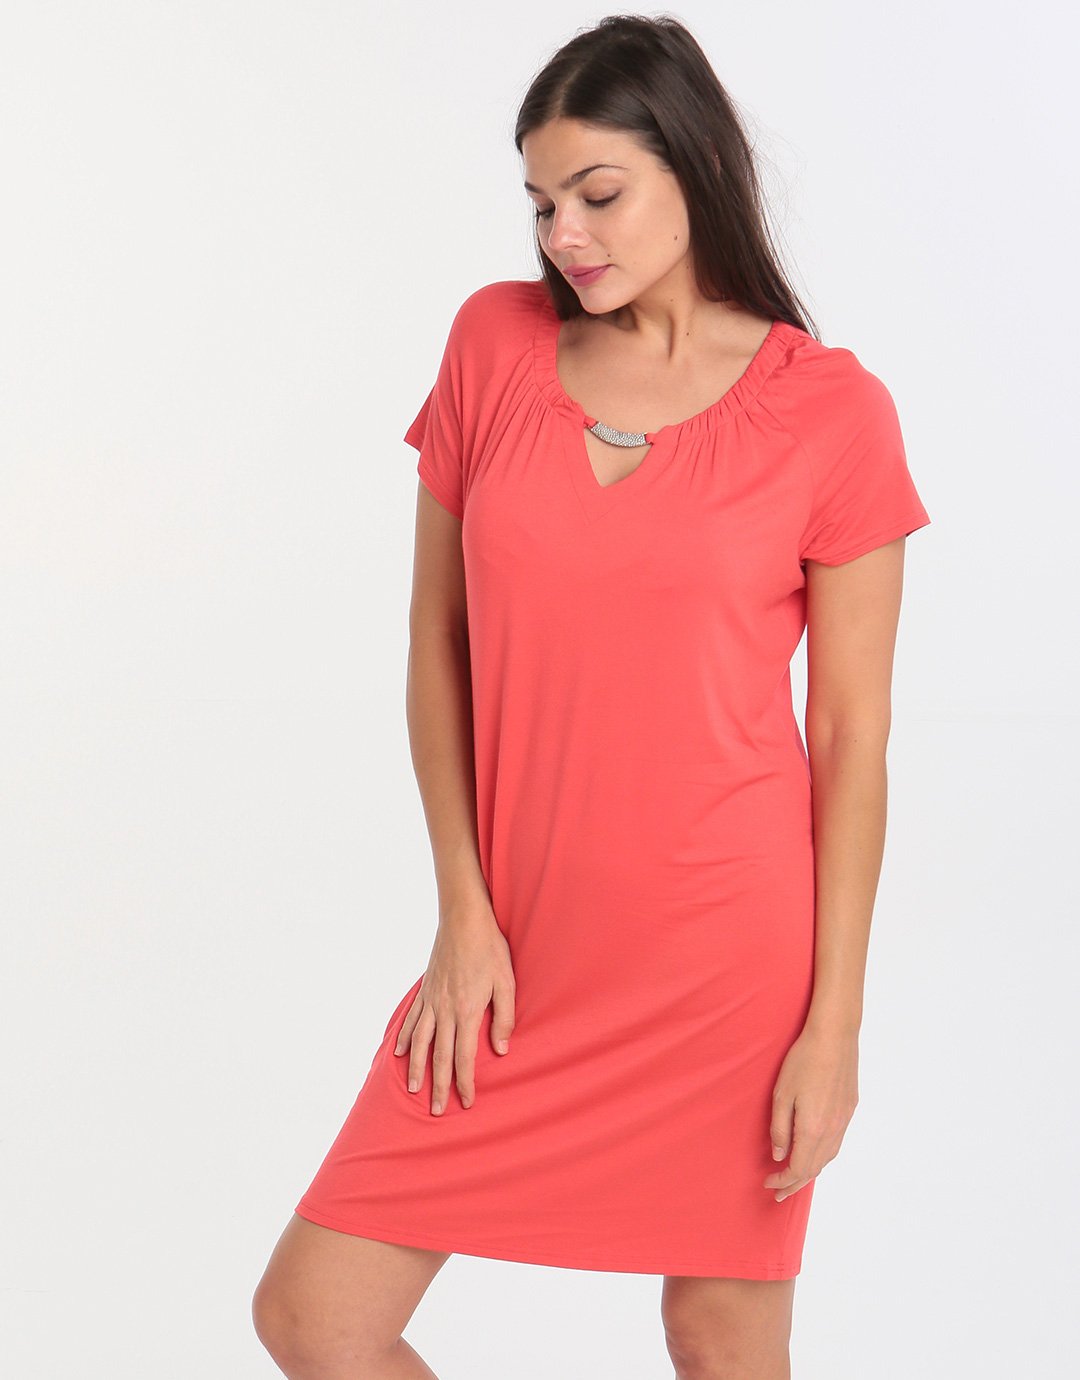 Charmor Necklace Detail Dress - Red